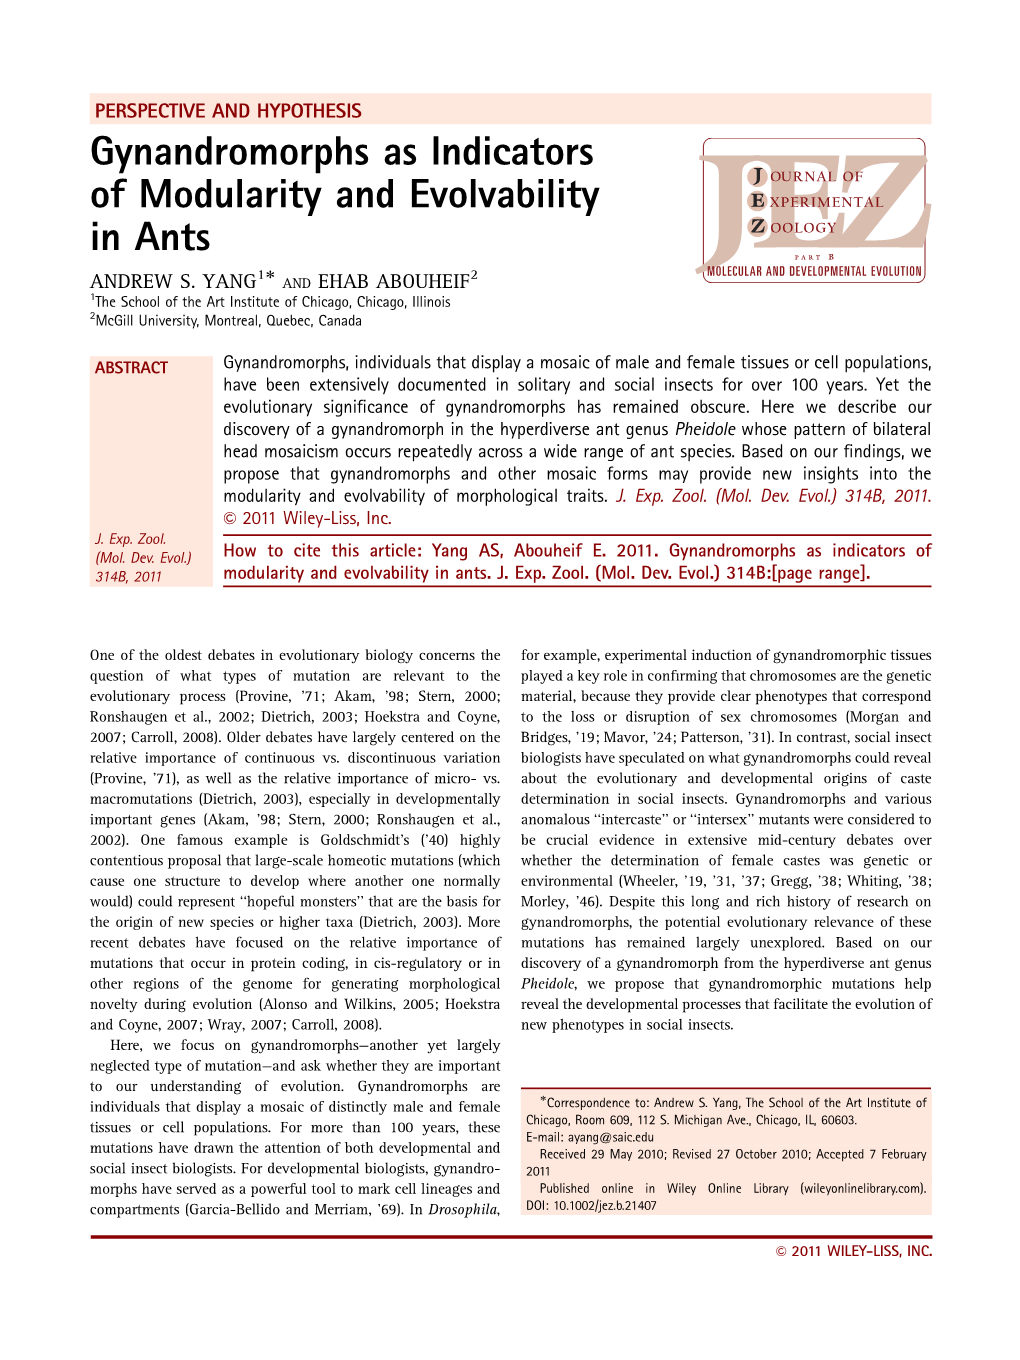 Gynandromorphs As Indicators of Modularity and Evolvability in Ants 1Ã 2 ANDREW S